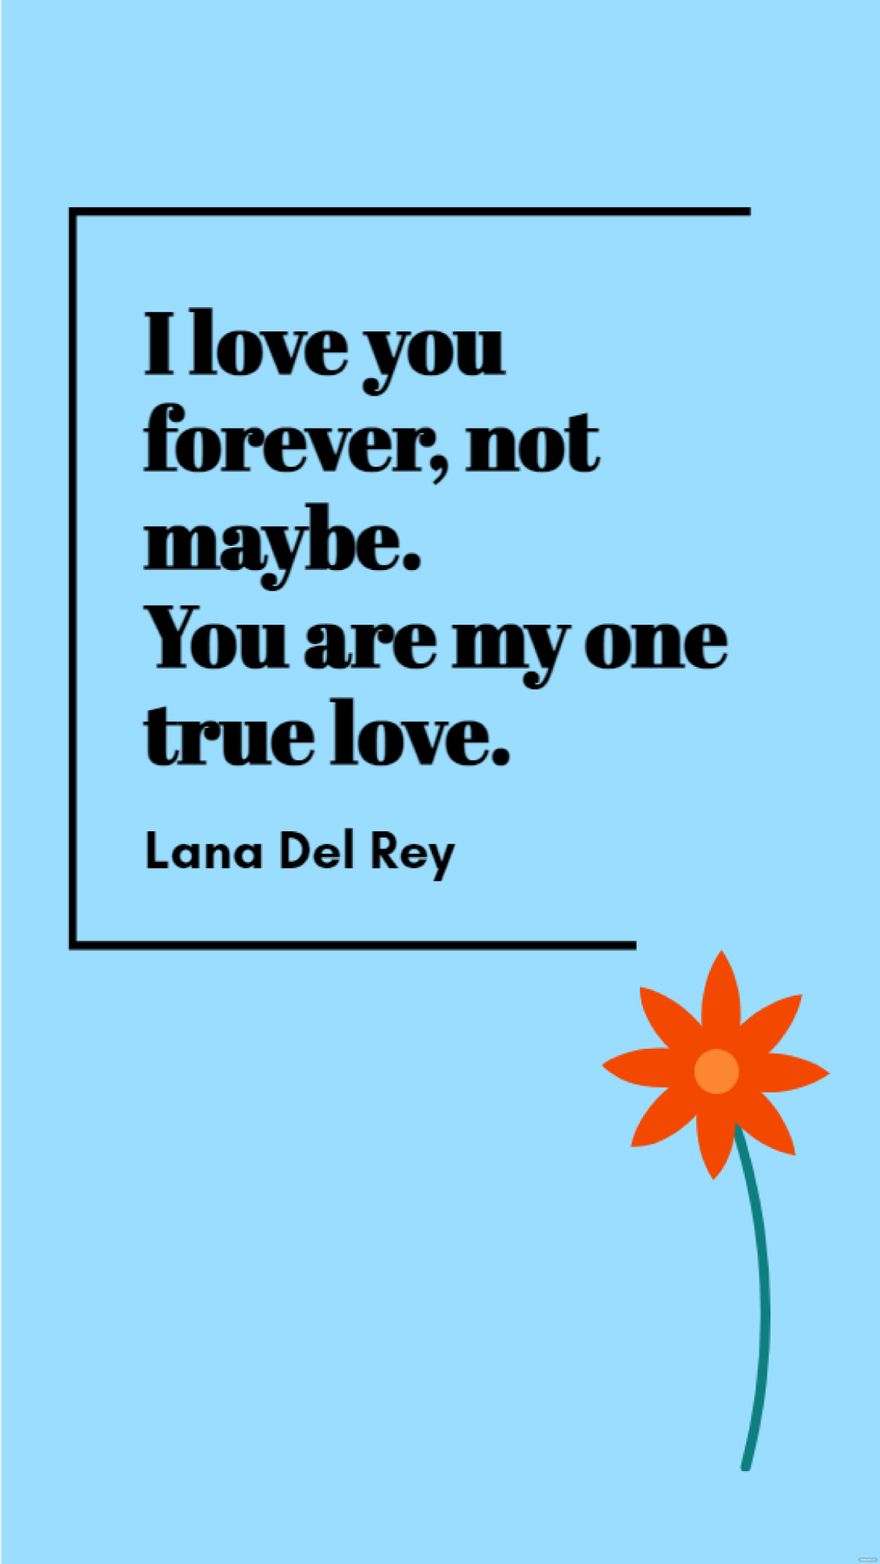 Lana Del Rey - I love you forever, not maybe. You are my one true love. in JPG